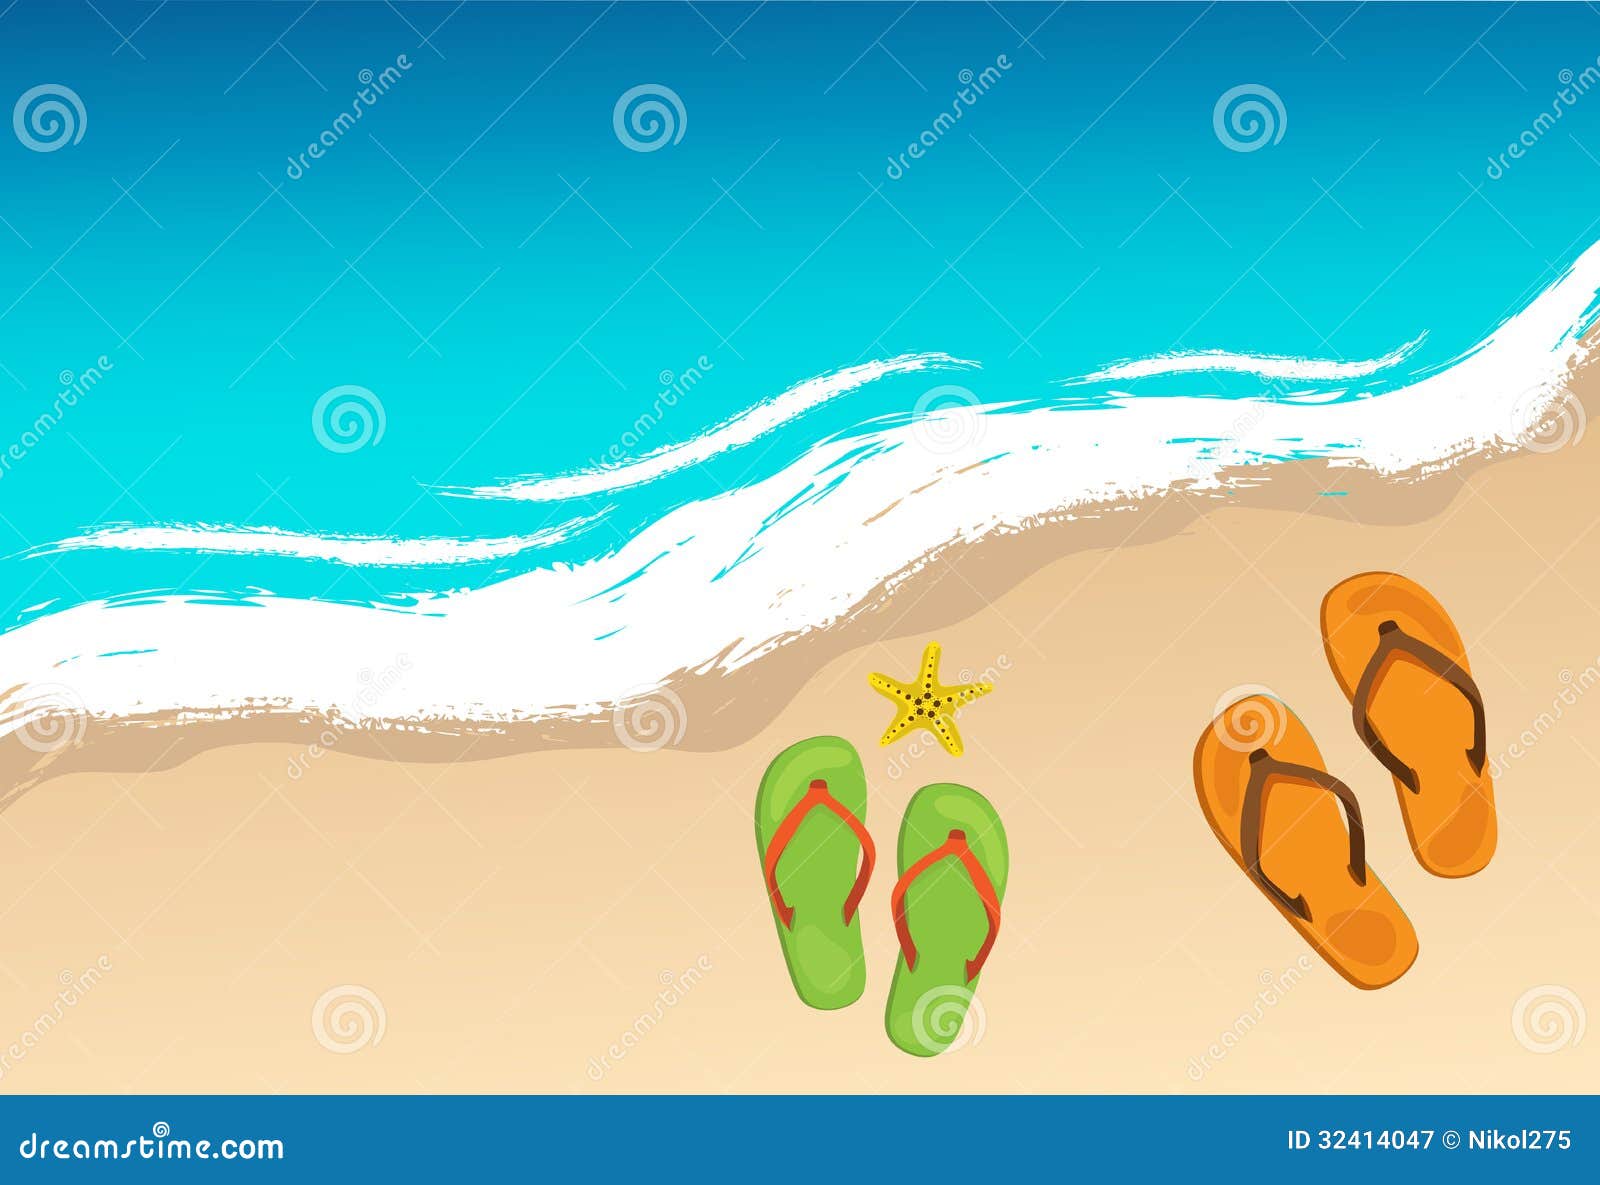 free clipart woman on the beach - photo #42